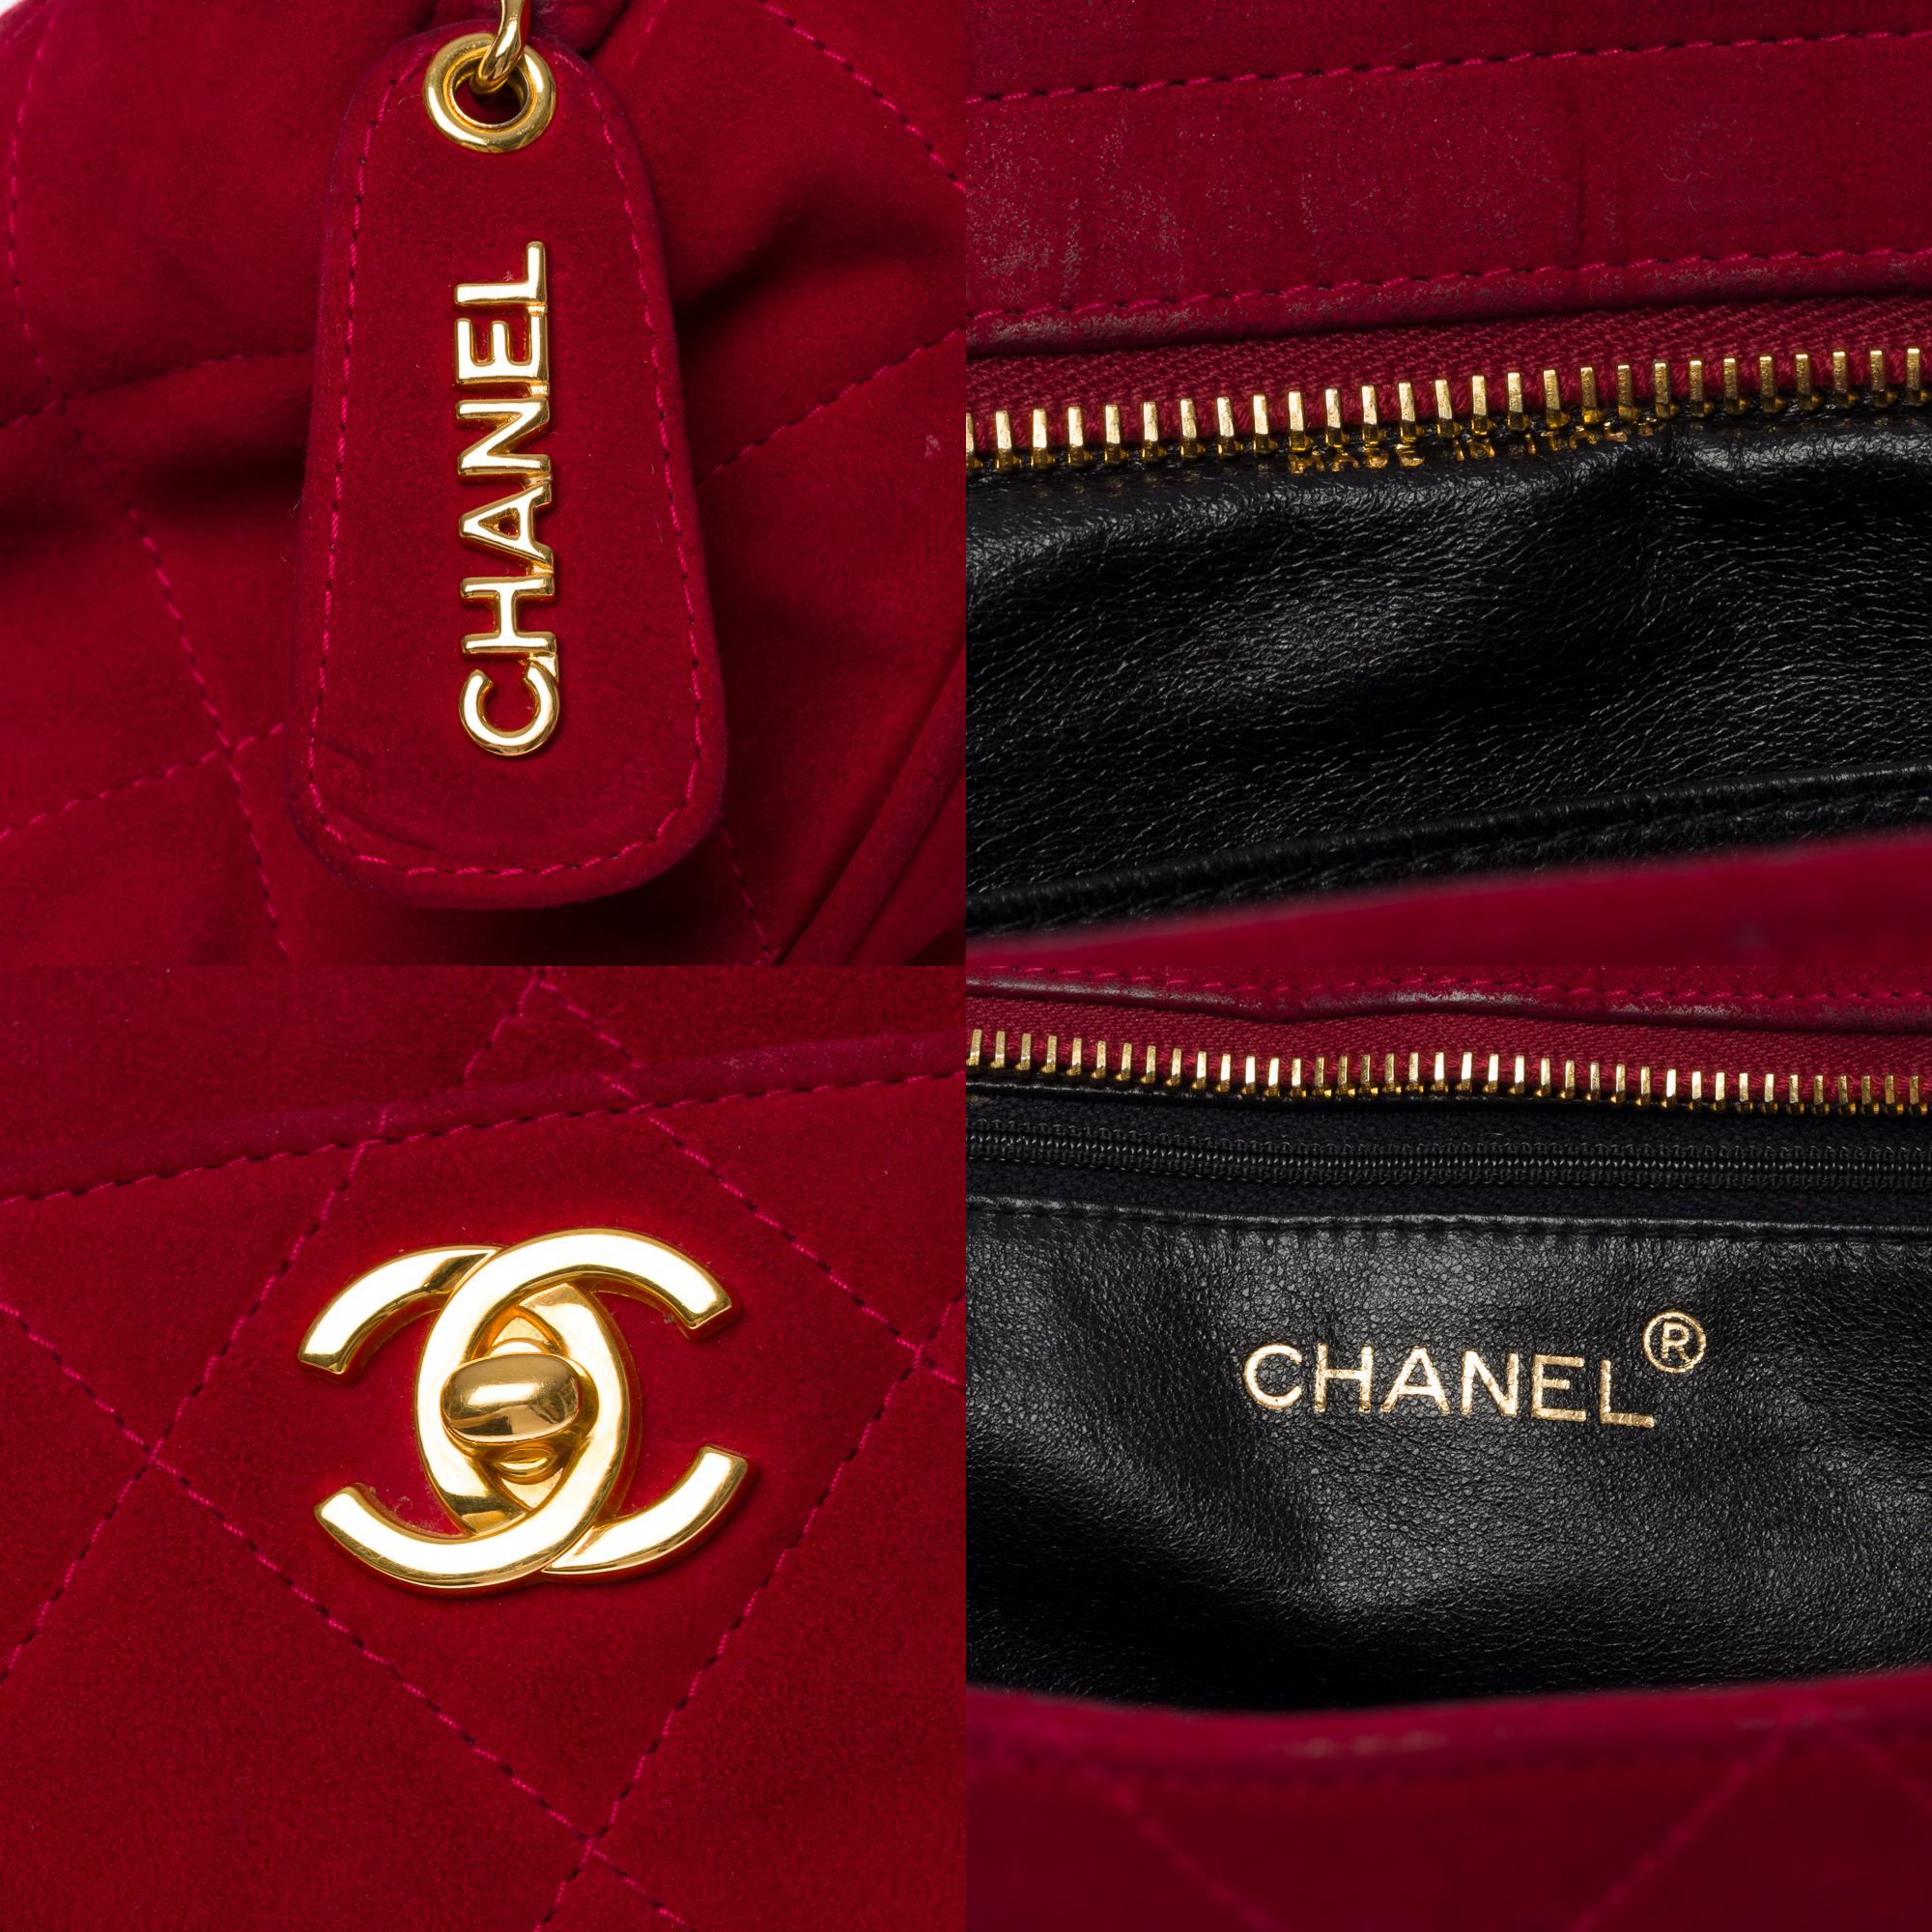 Gorgeous Chanel Camera shoulder bag in red suede, GHW 1